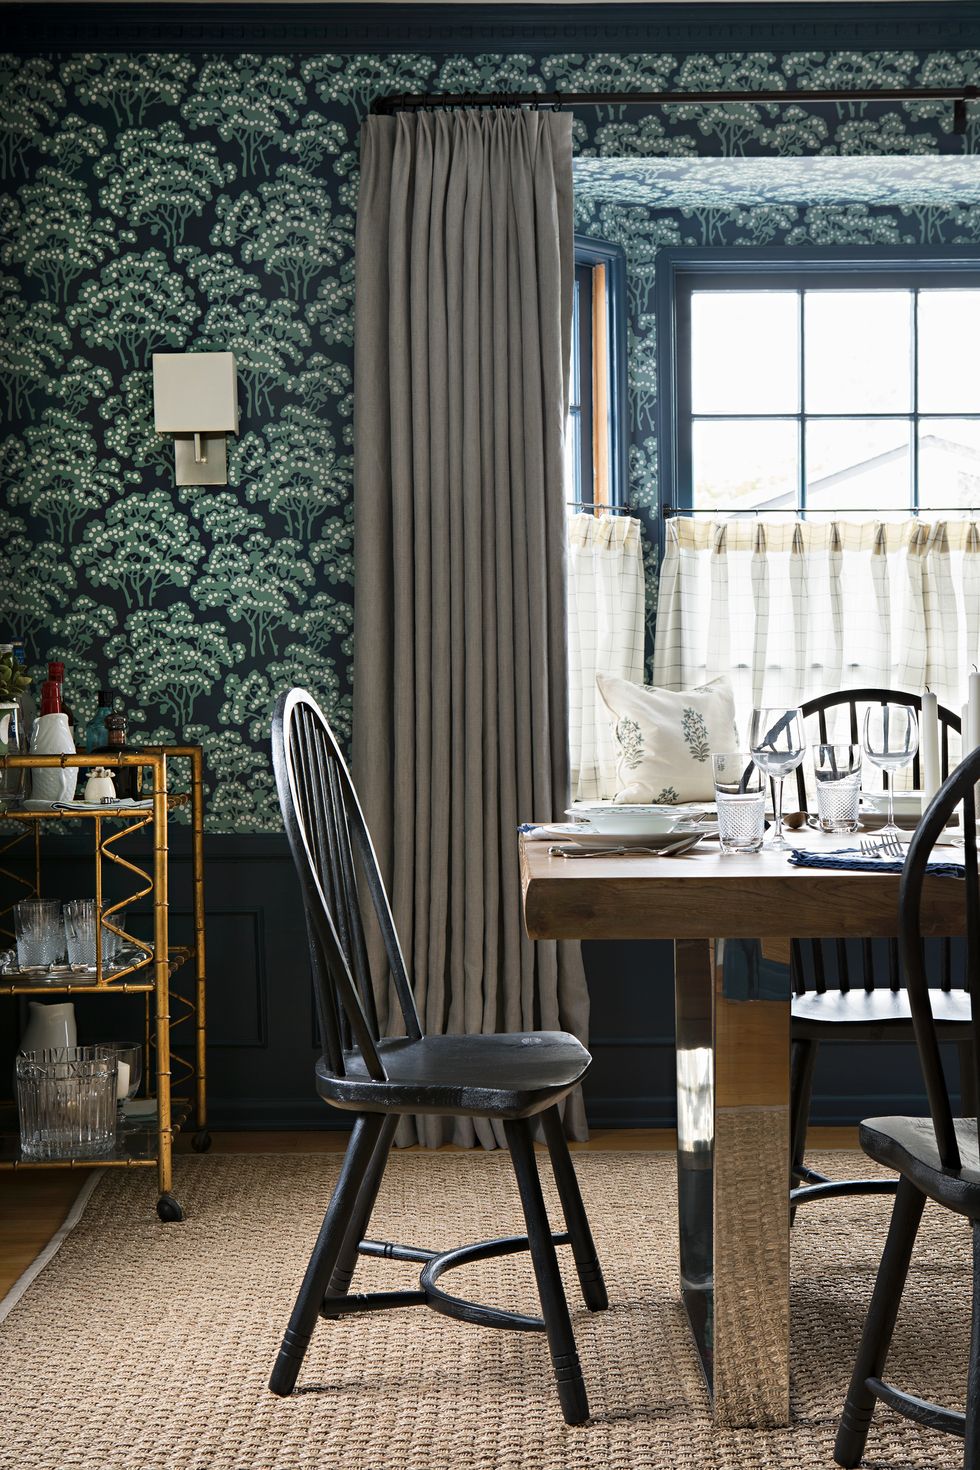 Best Wallpaper Tips - Kitchen Dining Nook with Floral Wallpaper - Blushing  Bungalow